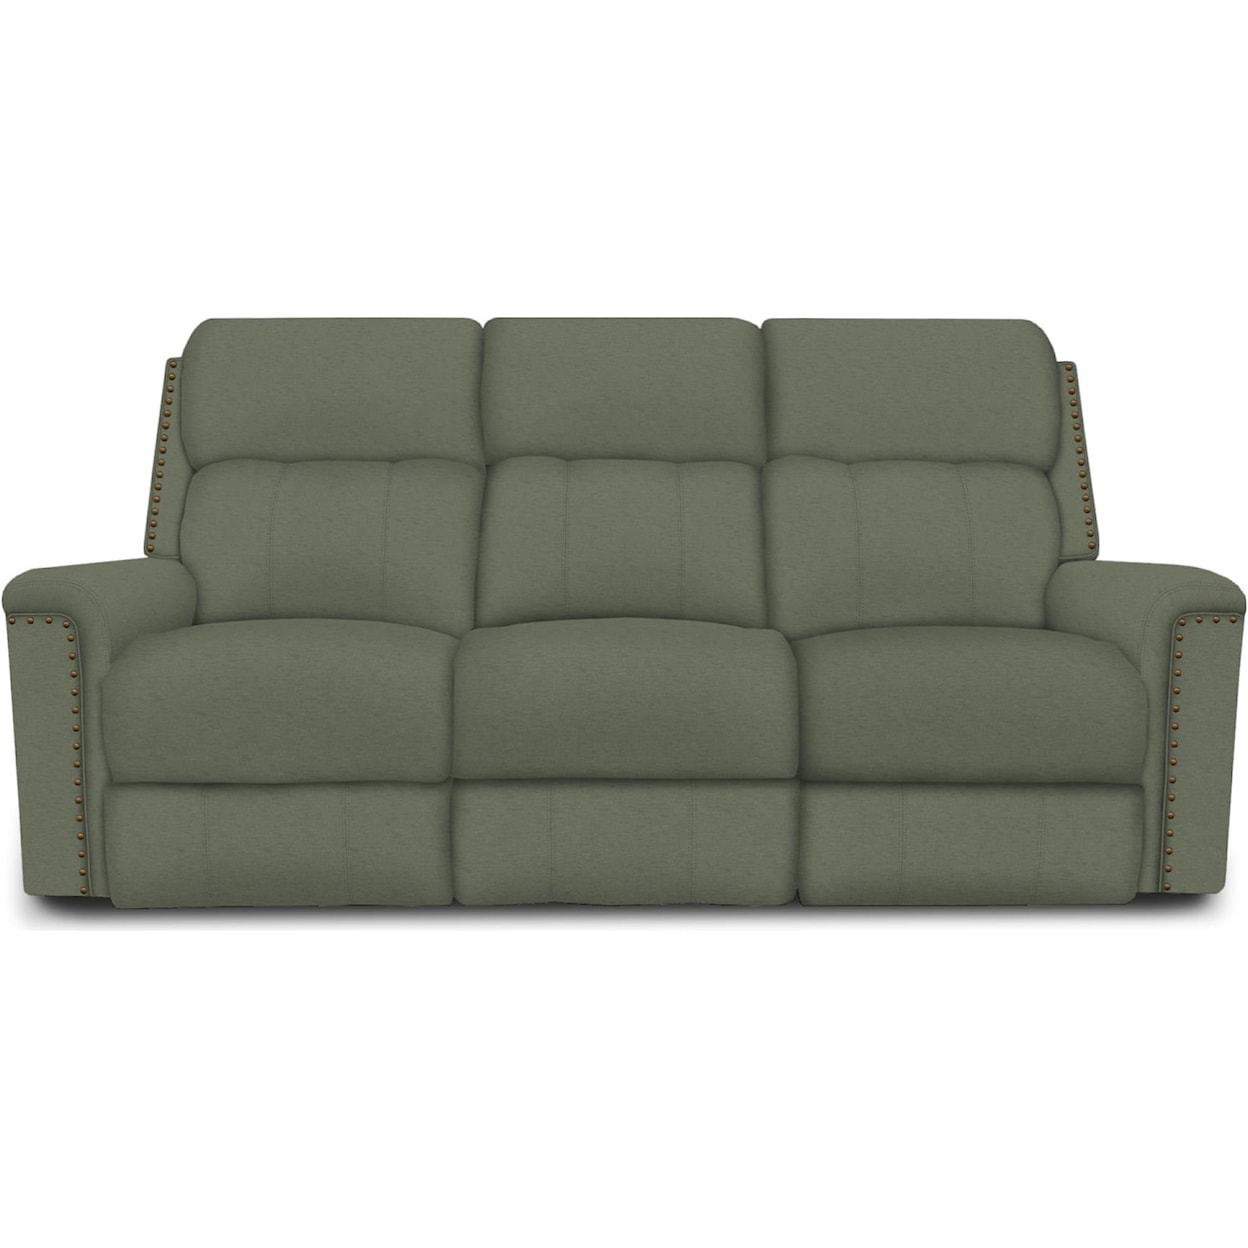 England EZ1C00/H/N Series EZ1C00 Double Reclining Sofa with Nails